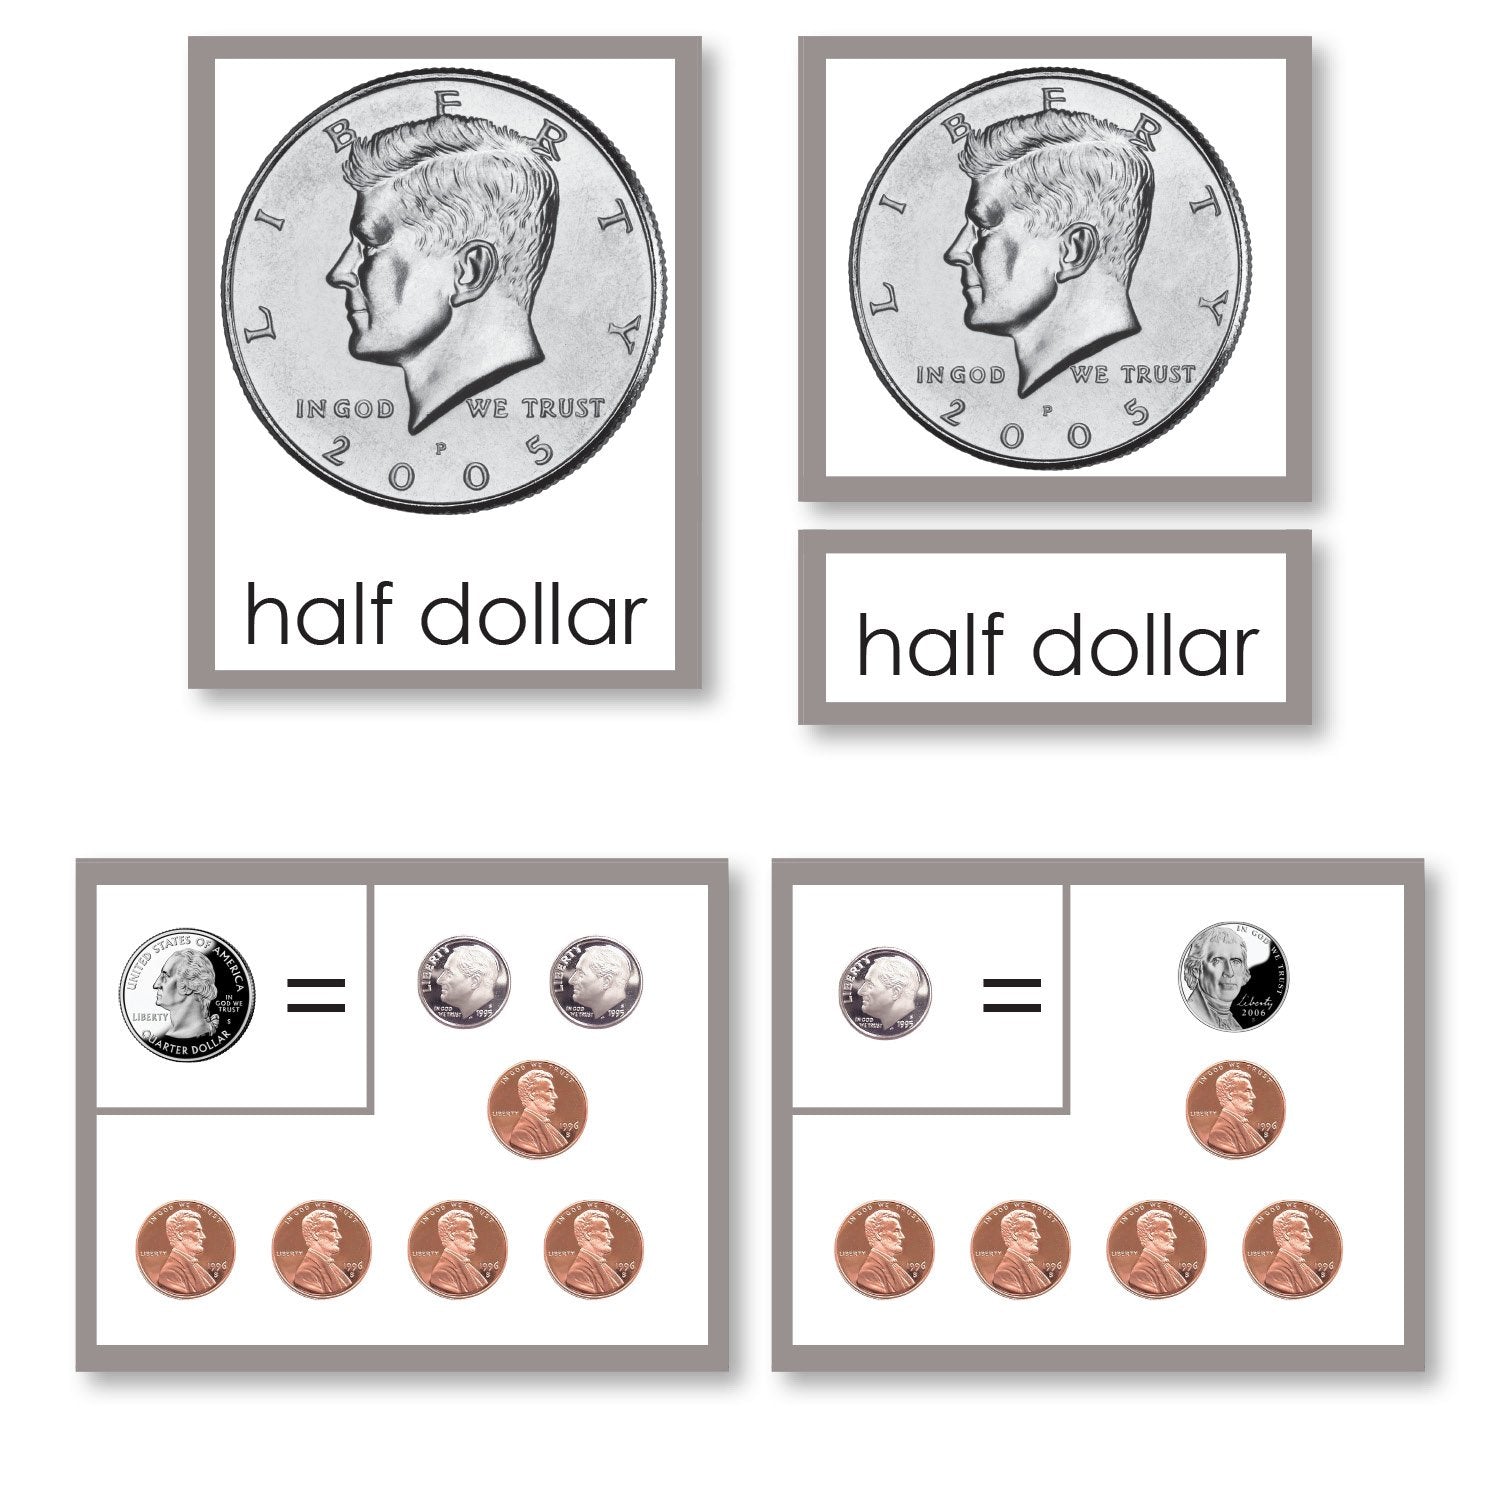 Math Materials-Money - Coin Equivalency 3-Part Cards With Working Charts